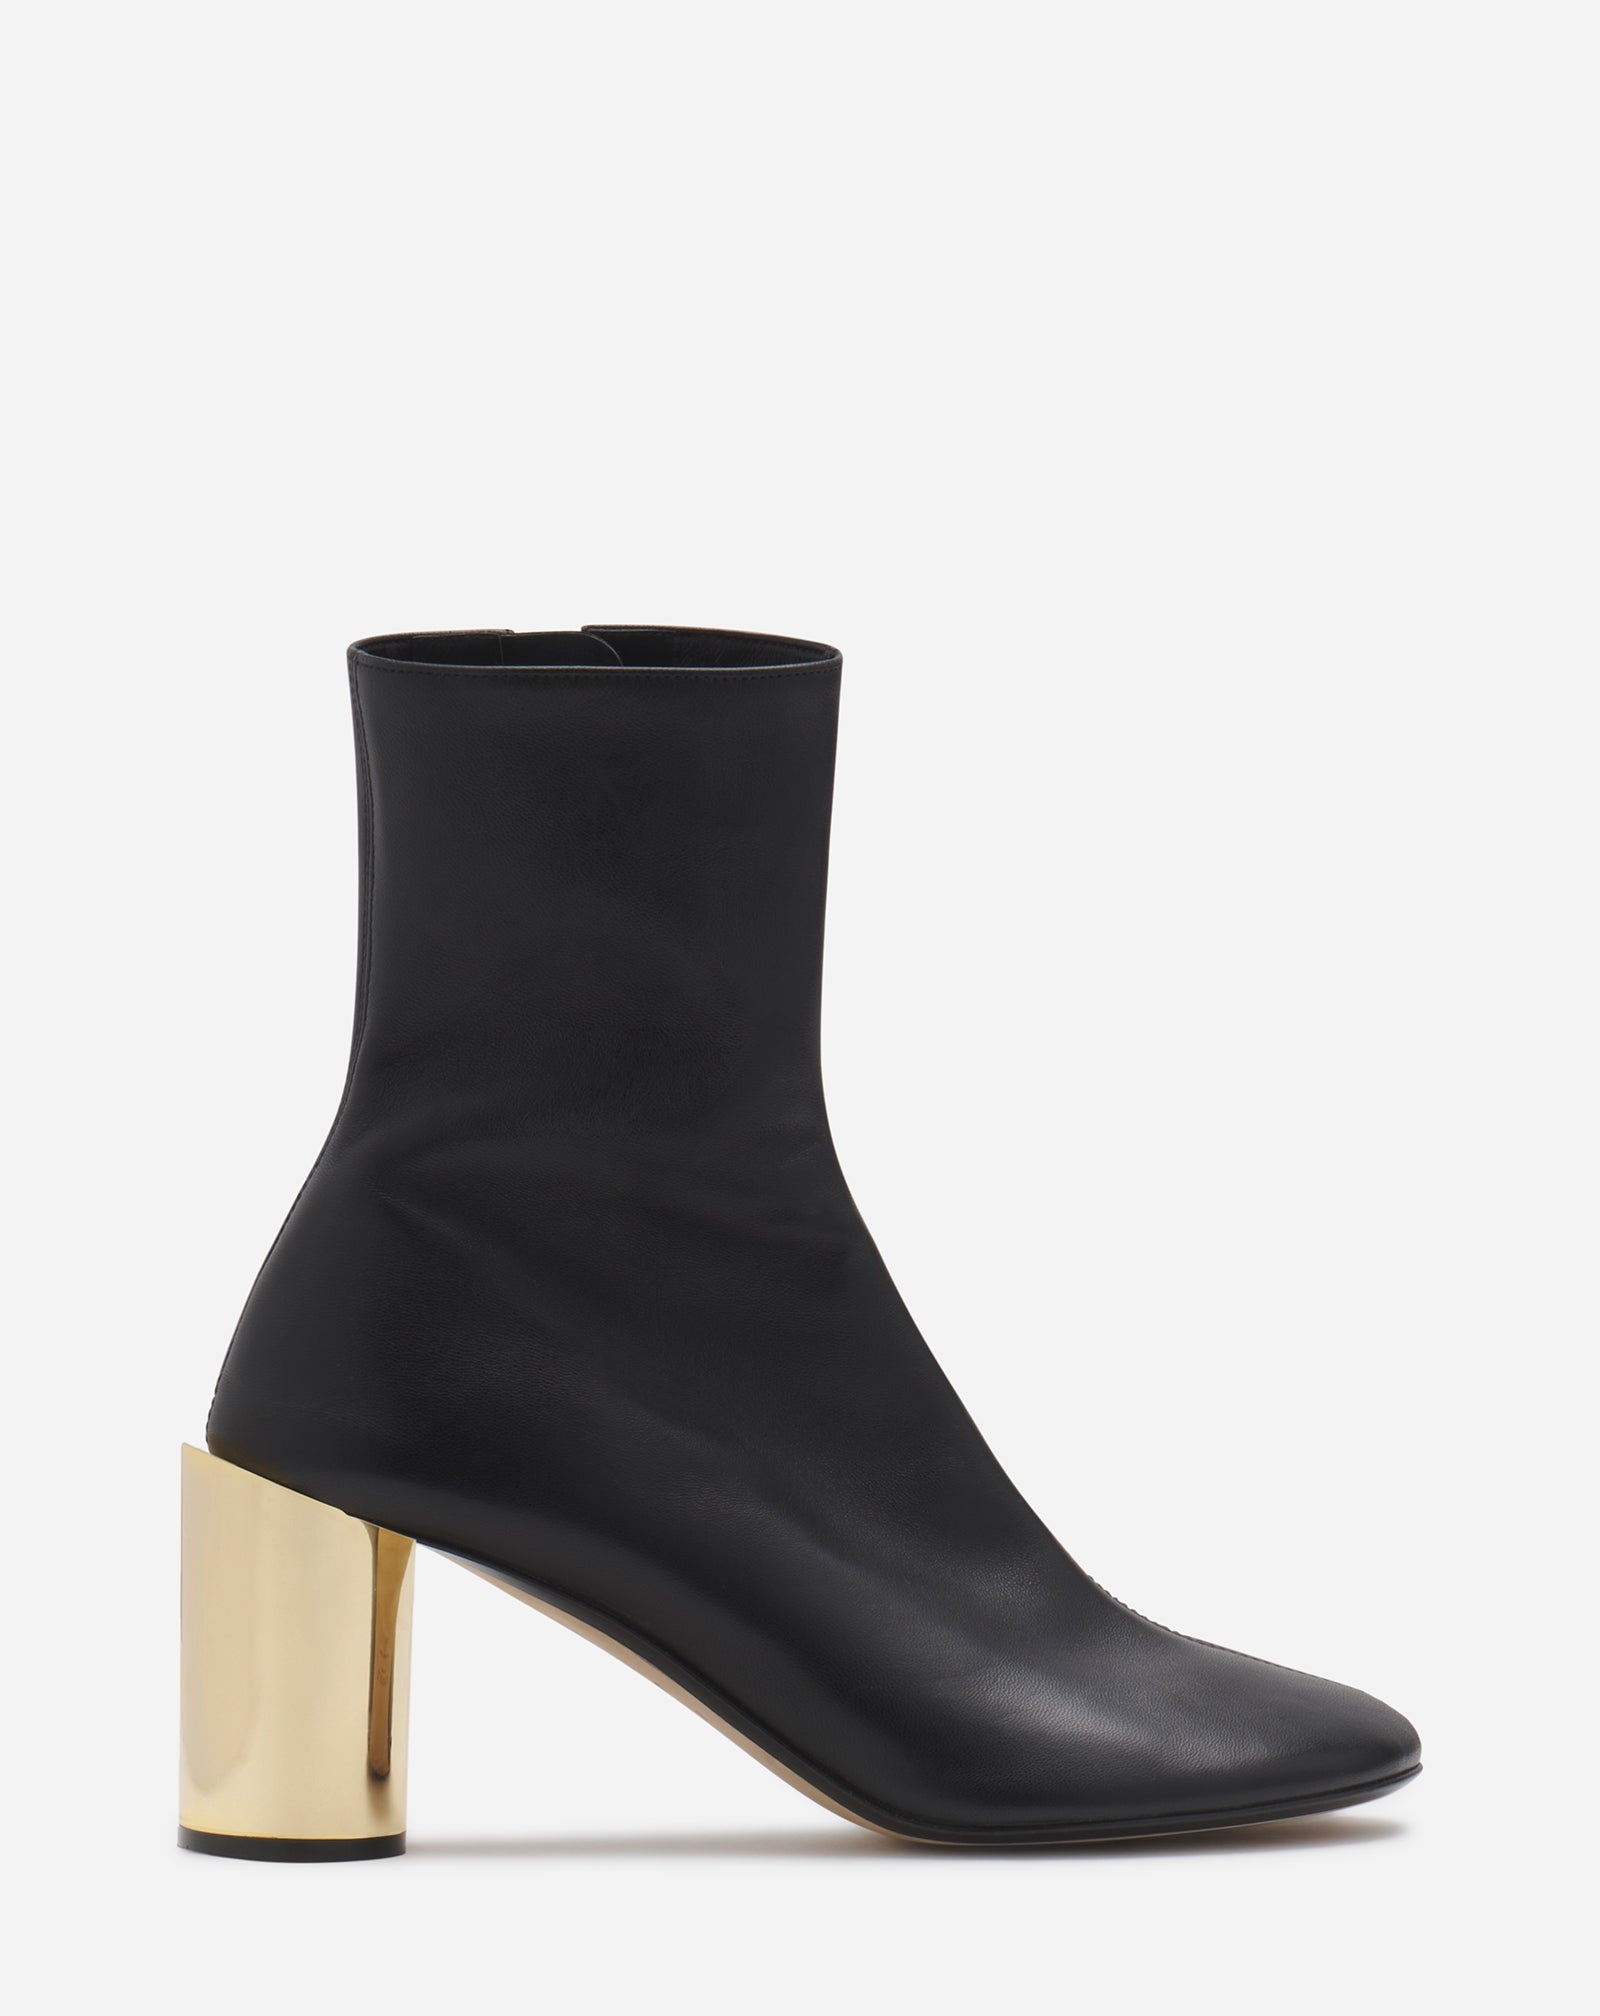 LEATHER SEQUENCE BY LANVIN CHUNKY HEELED BOOTS - 1